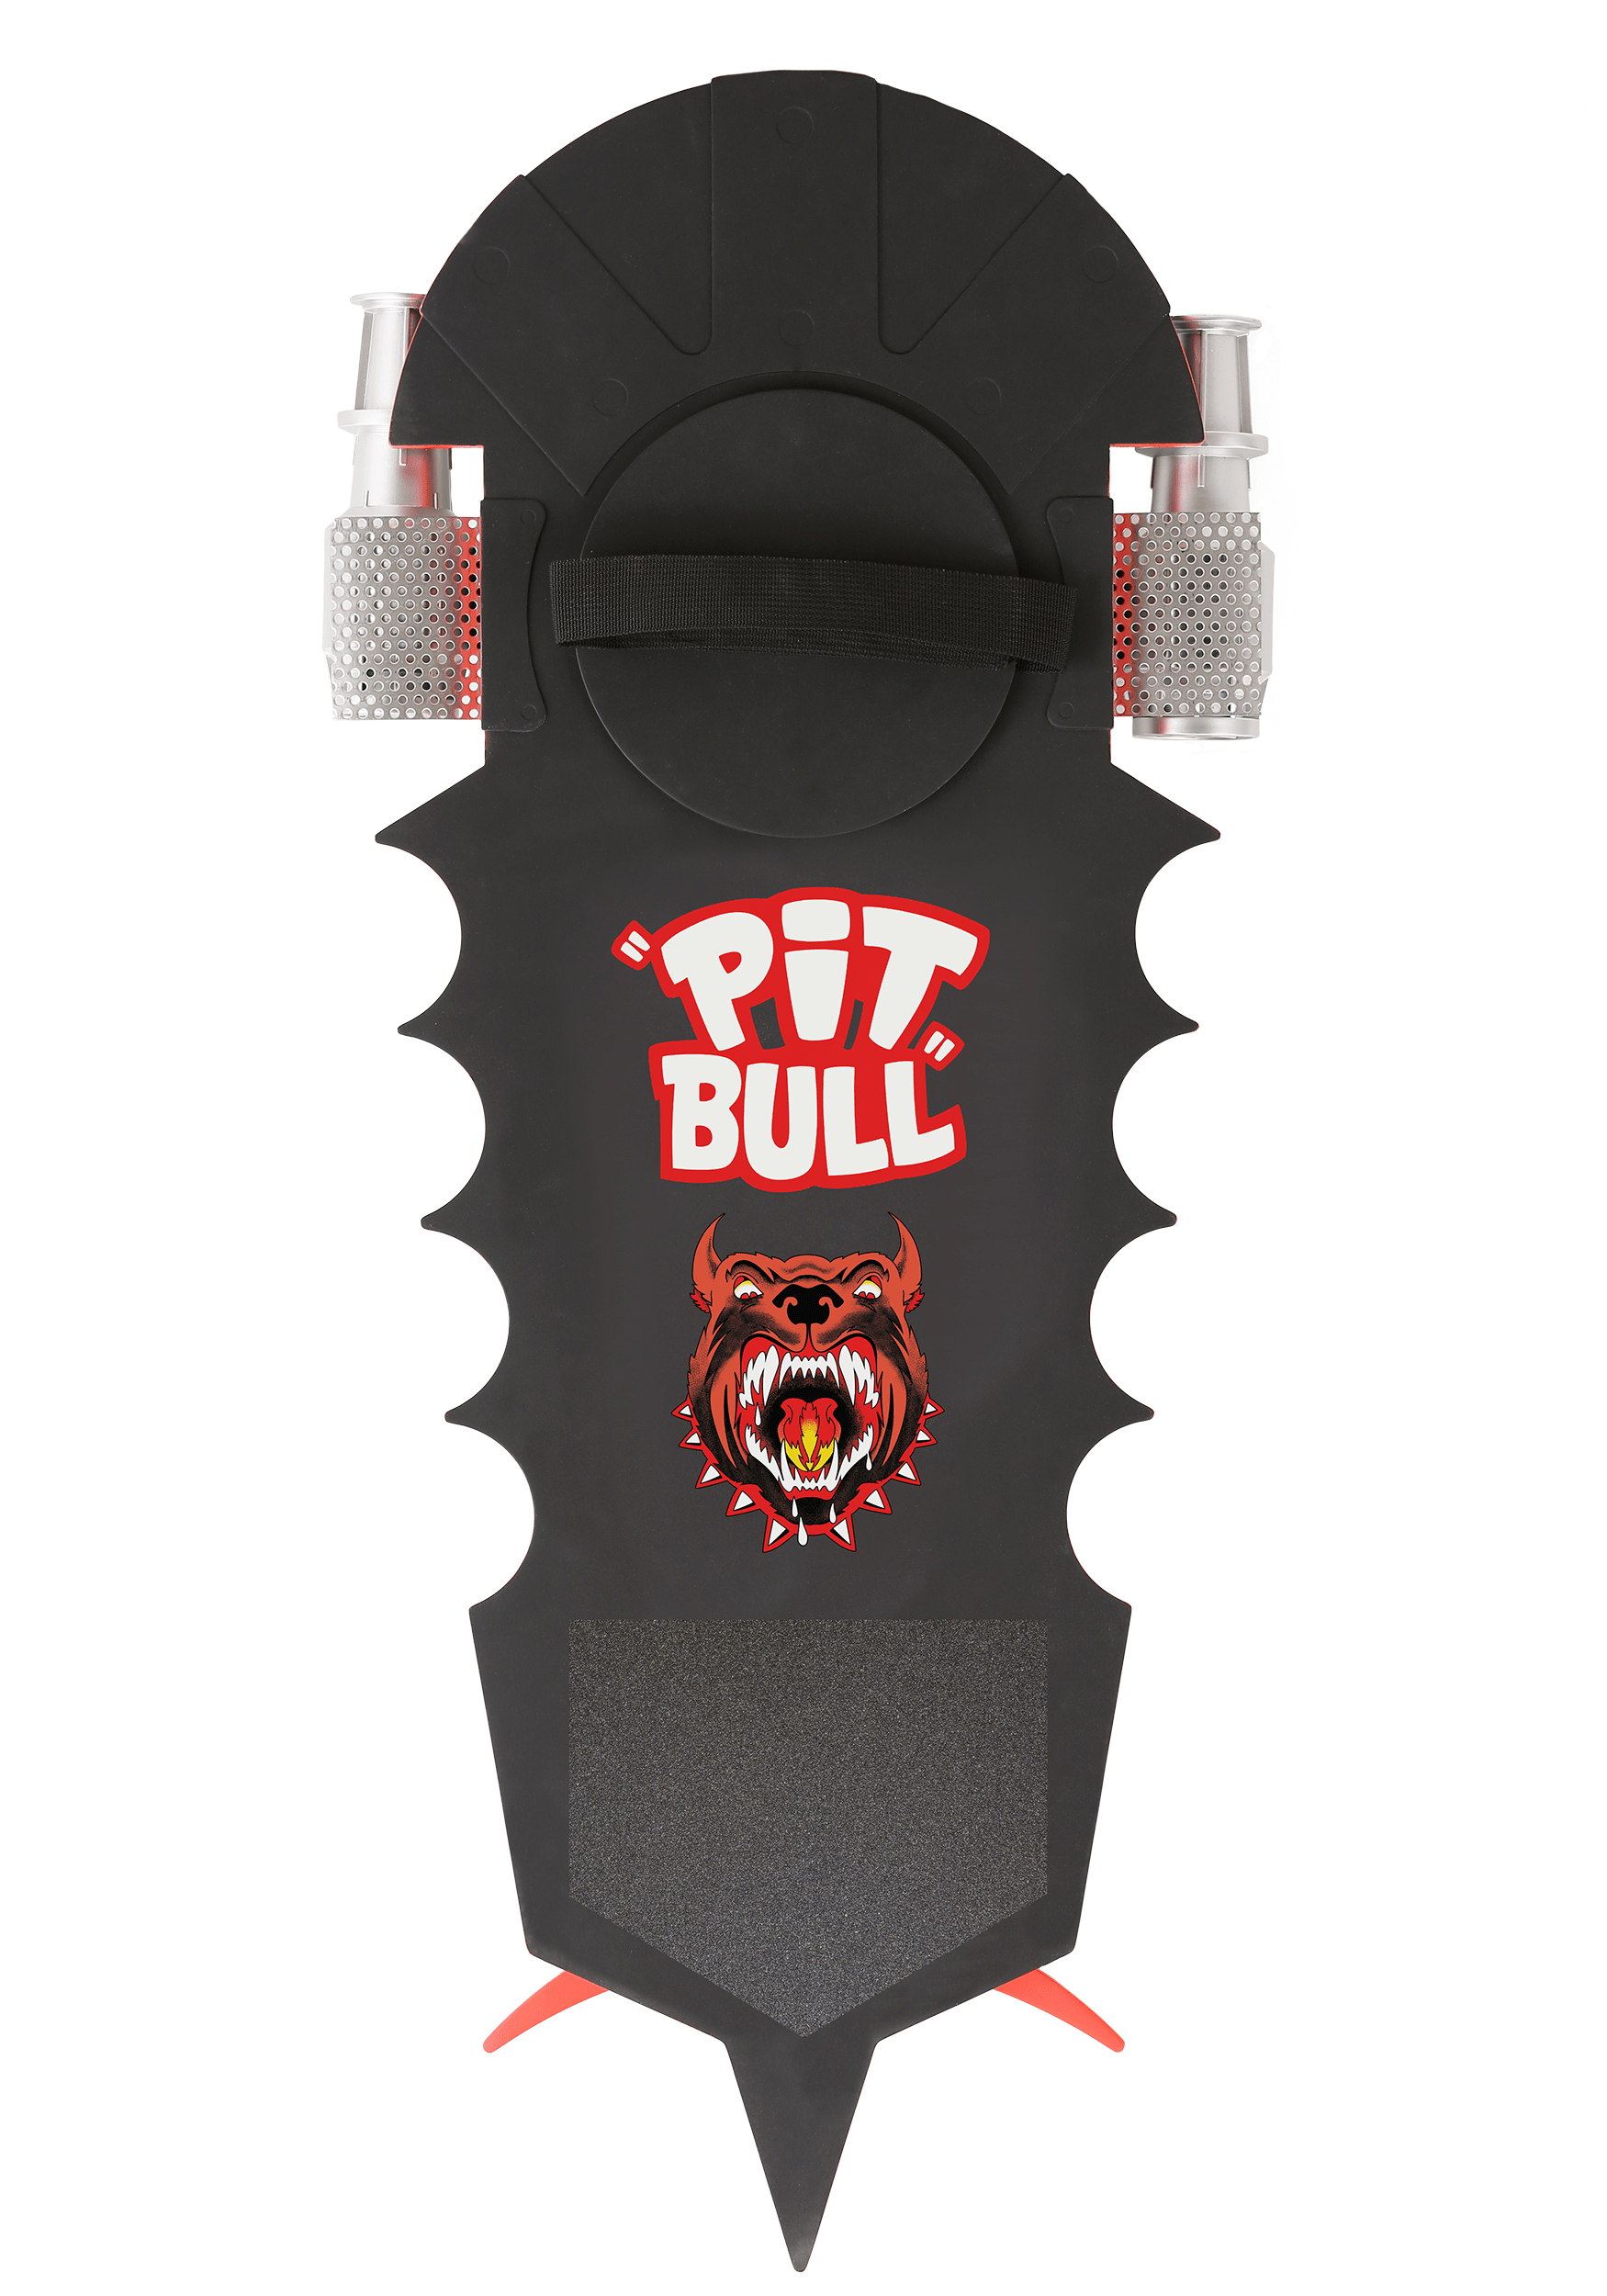 Pitbull Back to the Future II Hoverboard